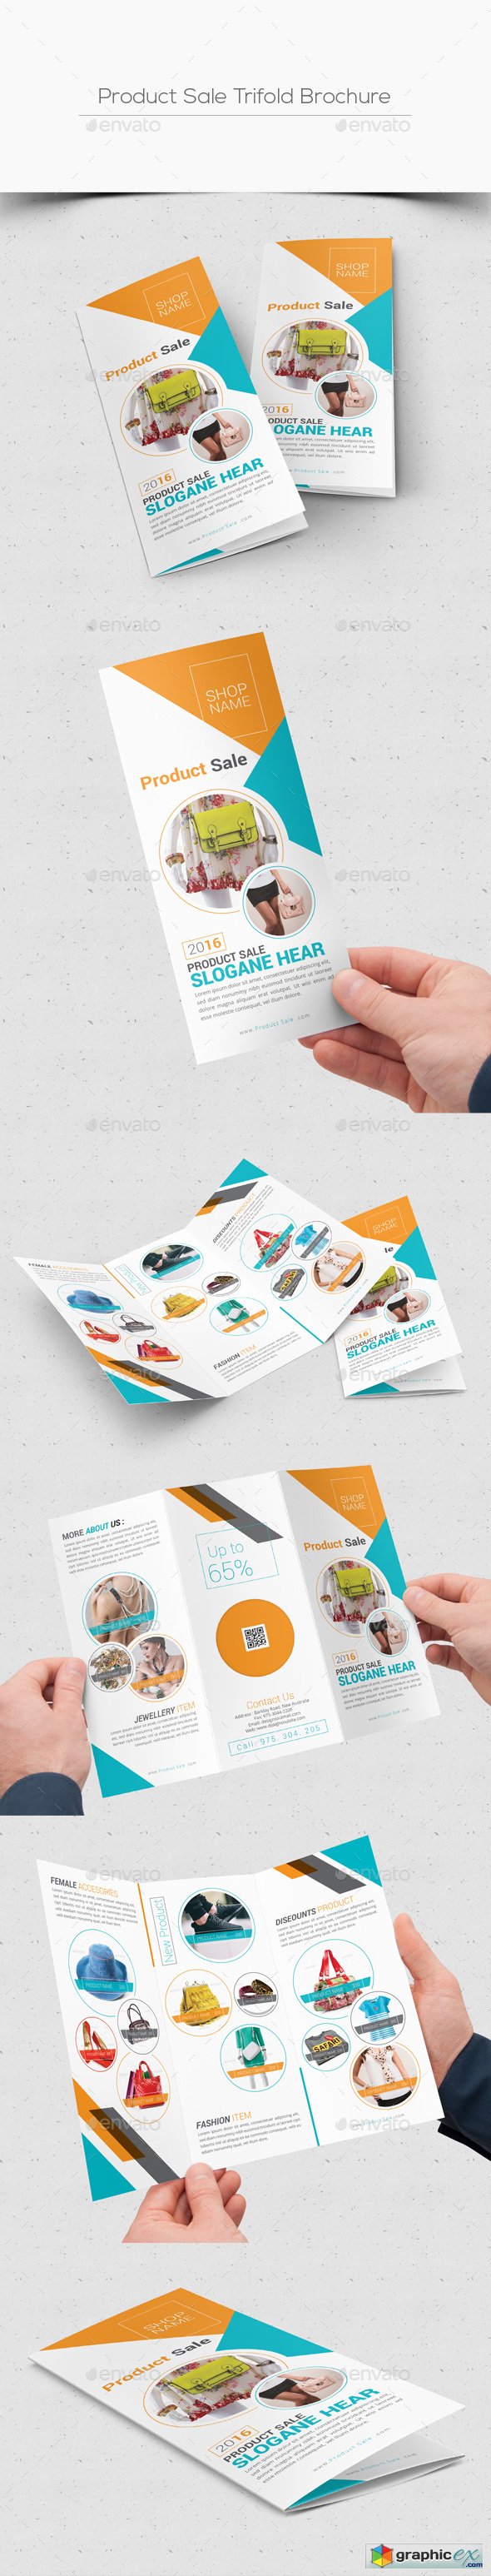 Product Sale Trifold Brochure